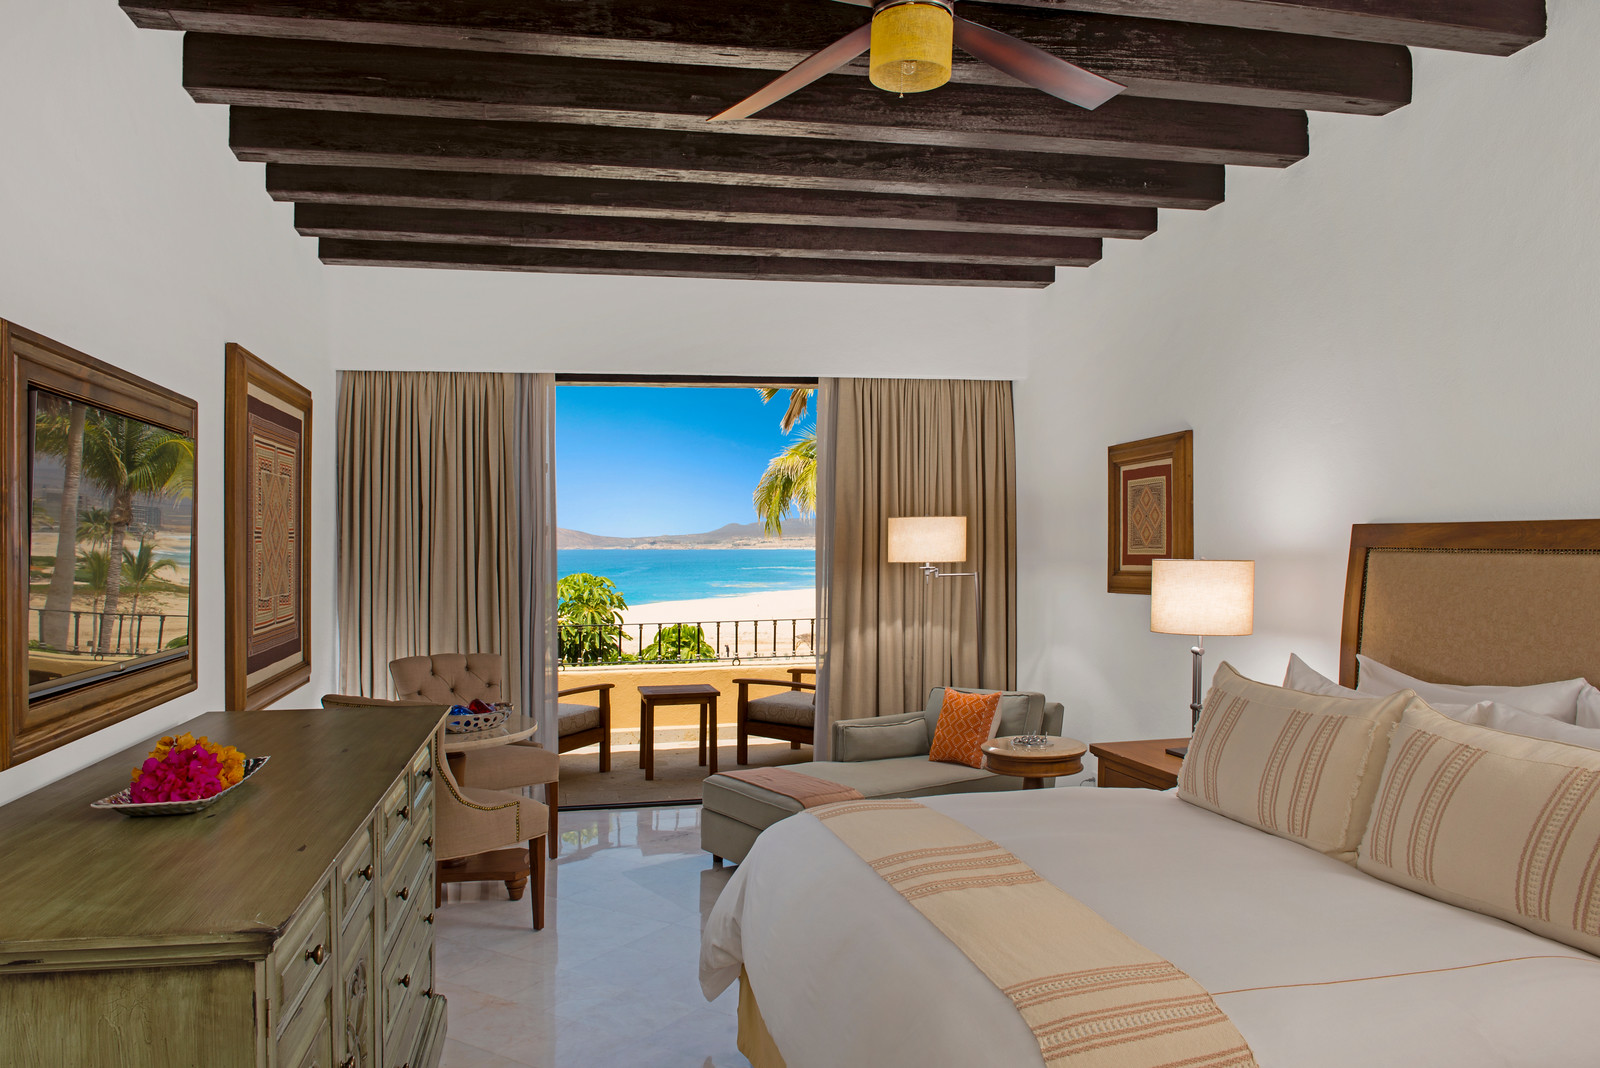  A Glimpse Inside an Ocean Front View Room. Photo Courtesy of Casa Del Mar 